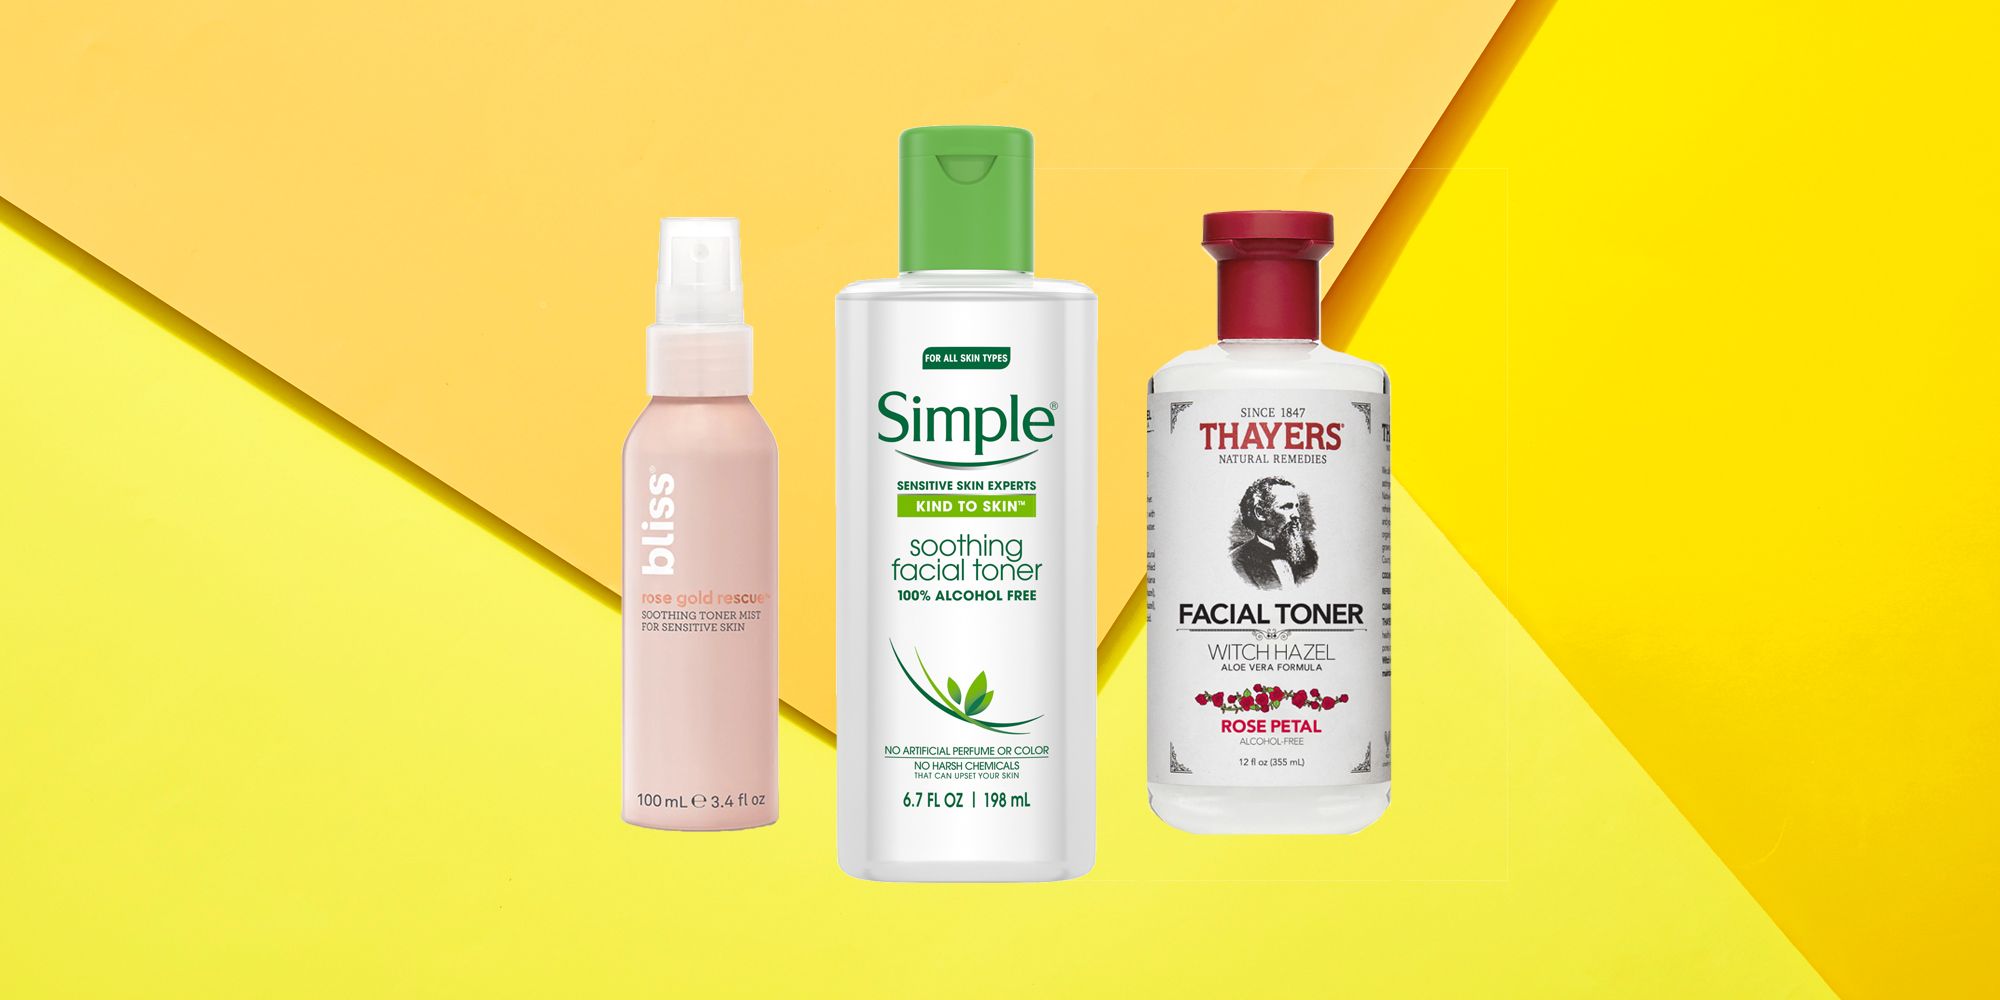 forfatter mental sæt ind 15 Best Drugstore Toners 2020 - Cheap Toners For Great Skin